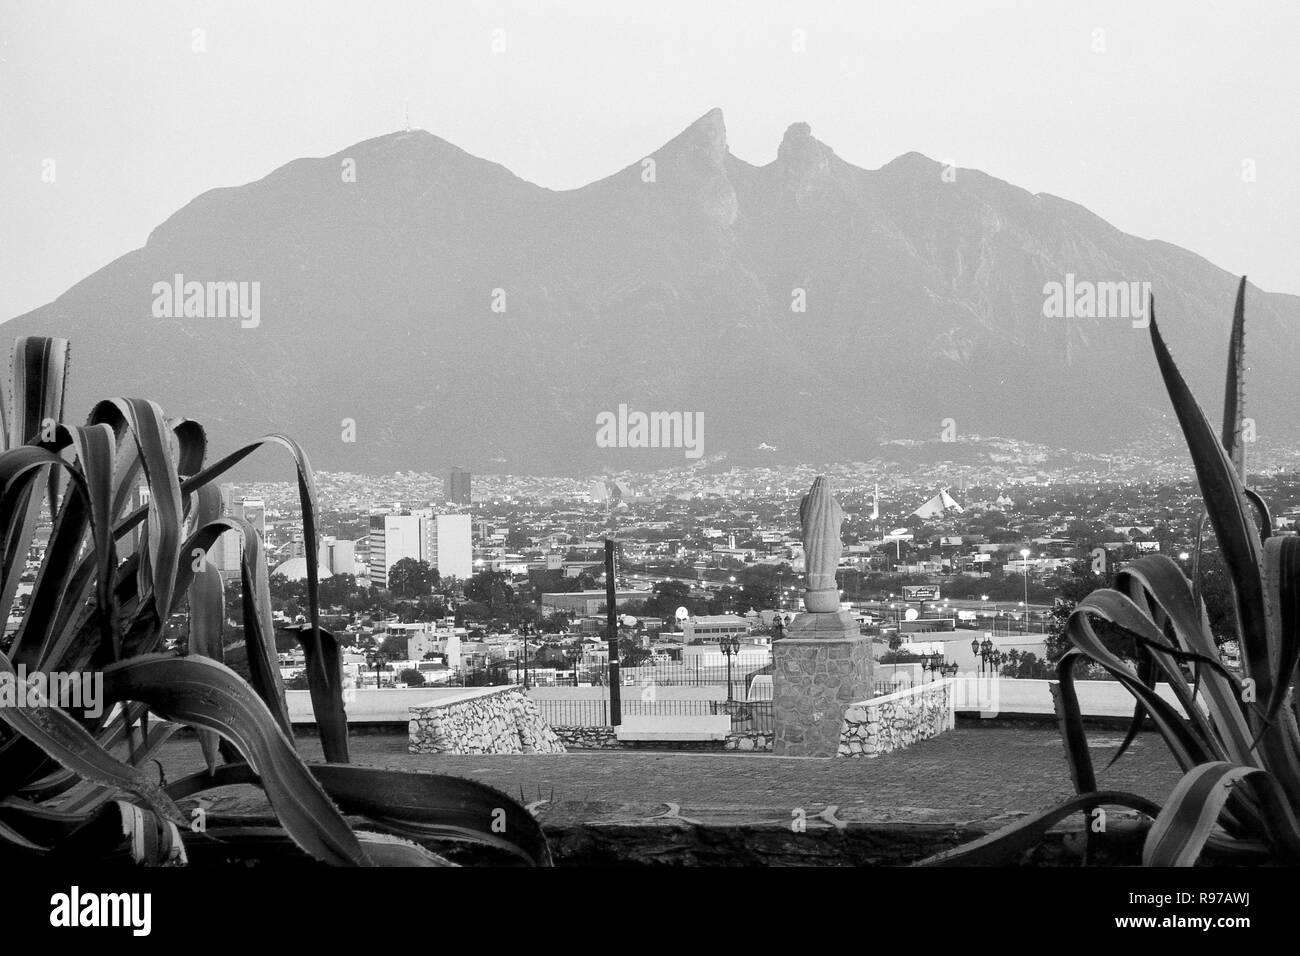 MONTERREY, NL/MEXICO - NOV 20, 2002: View from the Bishop's museum, Virgin of the Immaculate Conception sculpture and La Silla hill Stock Photo